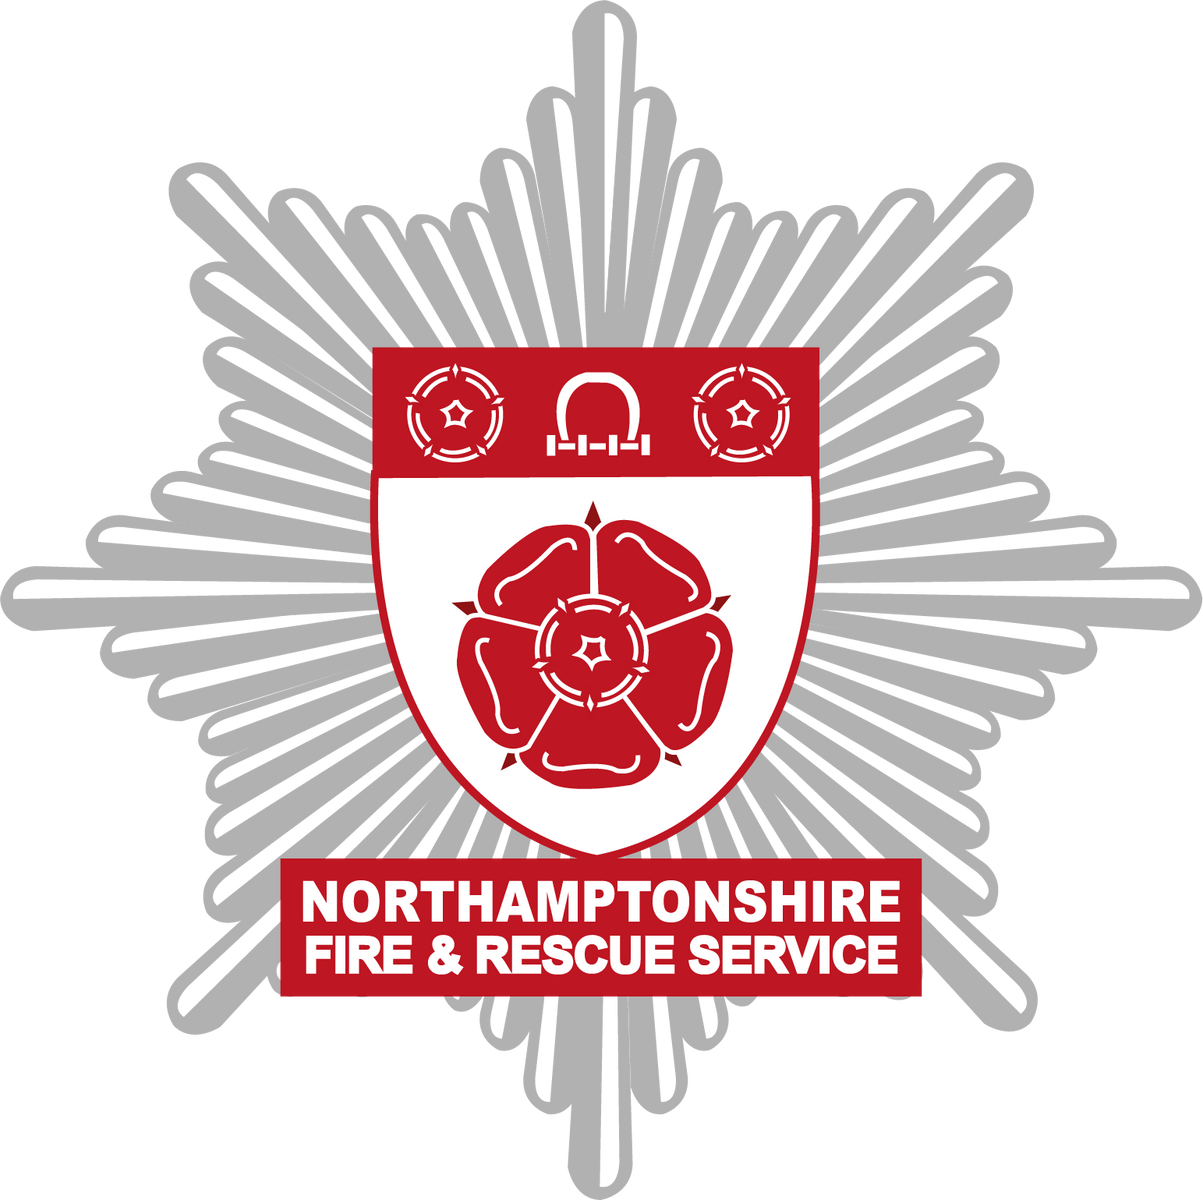 Northamptonshire Fire and Rescue Service logo